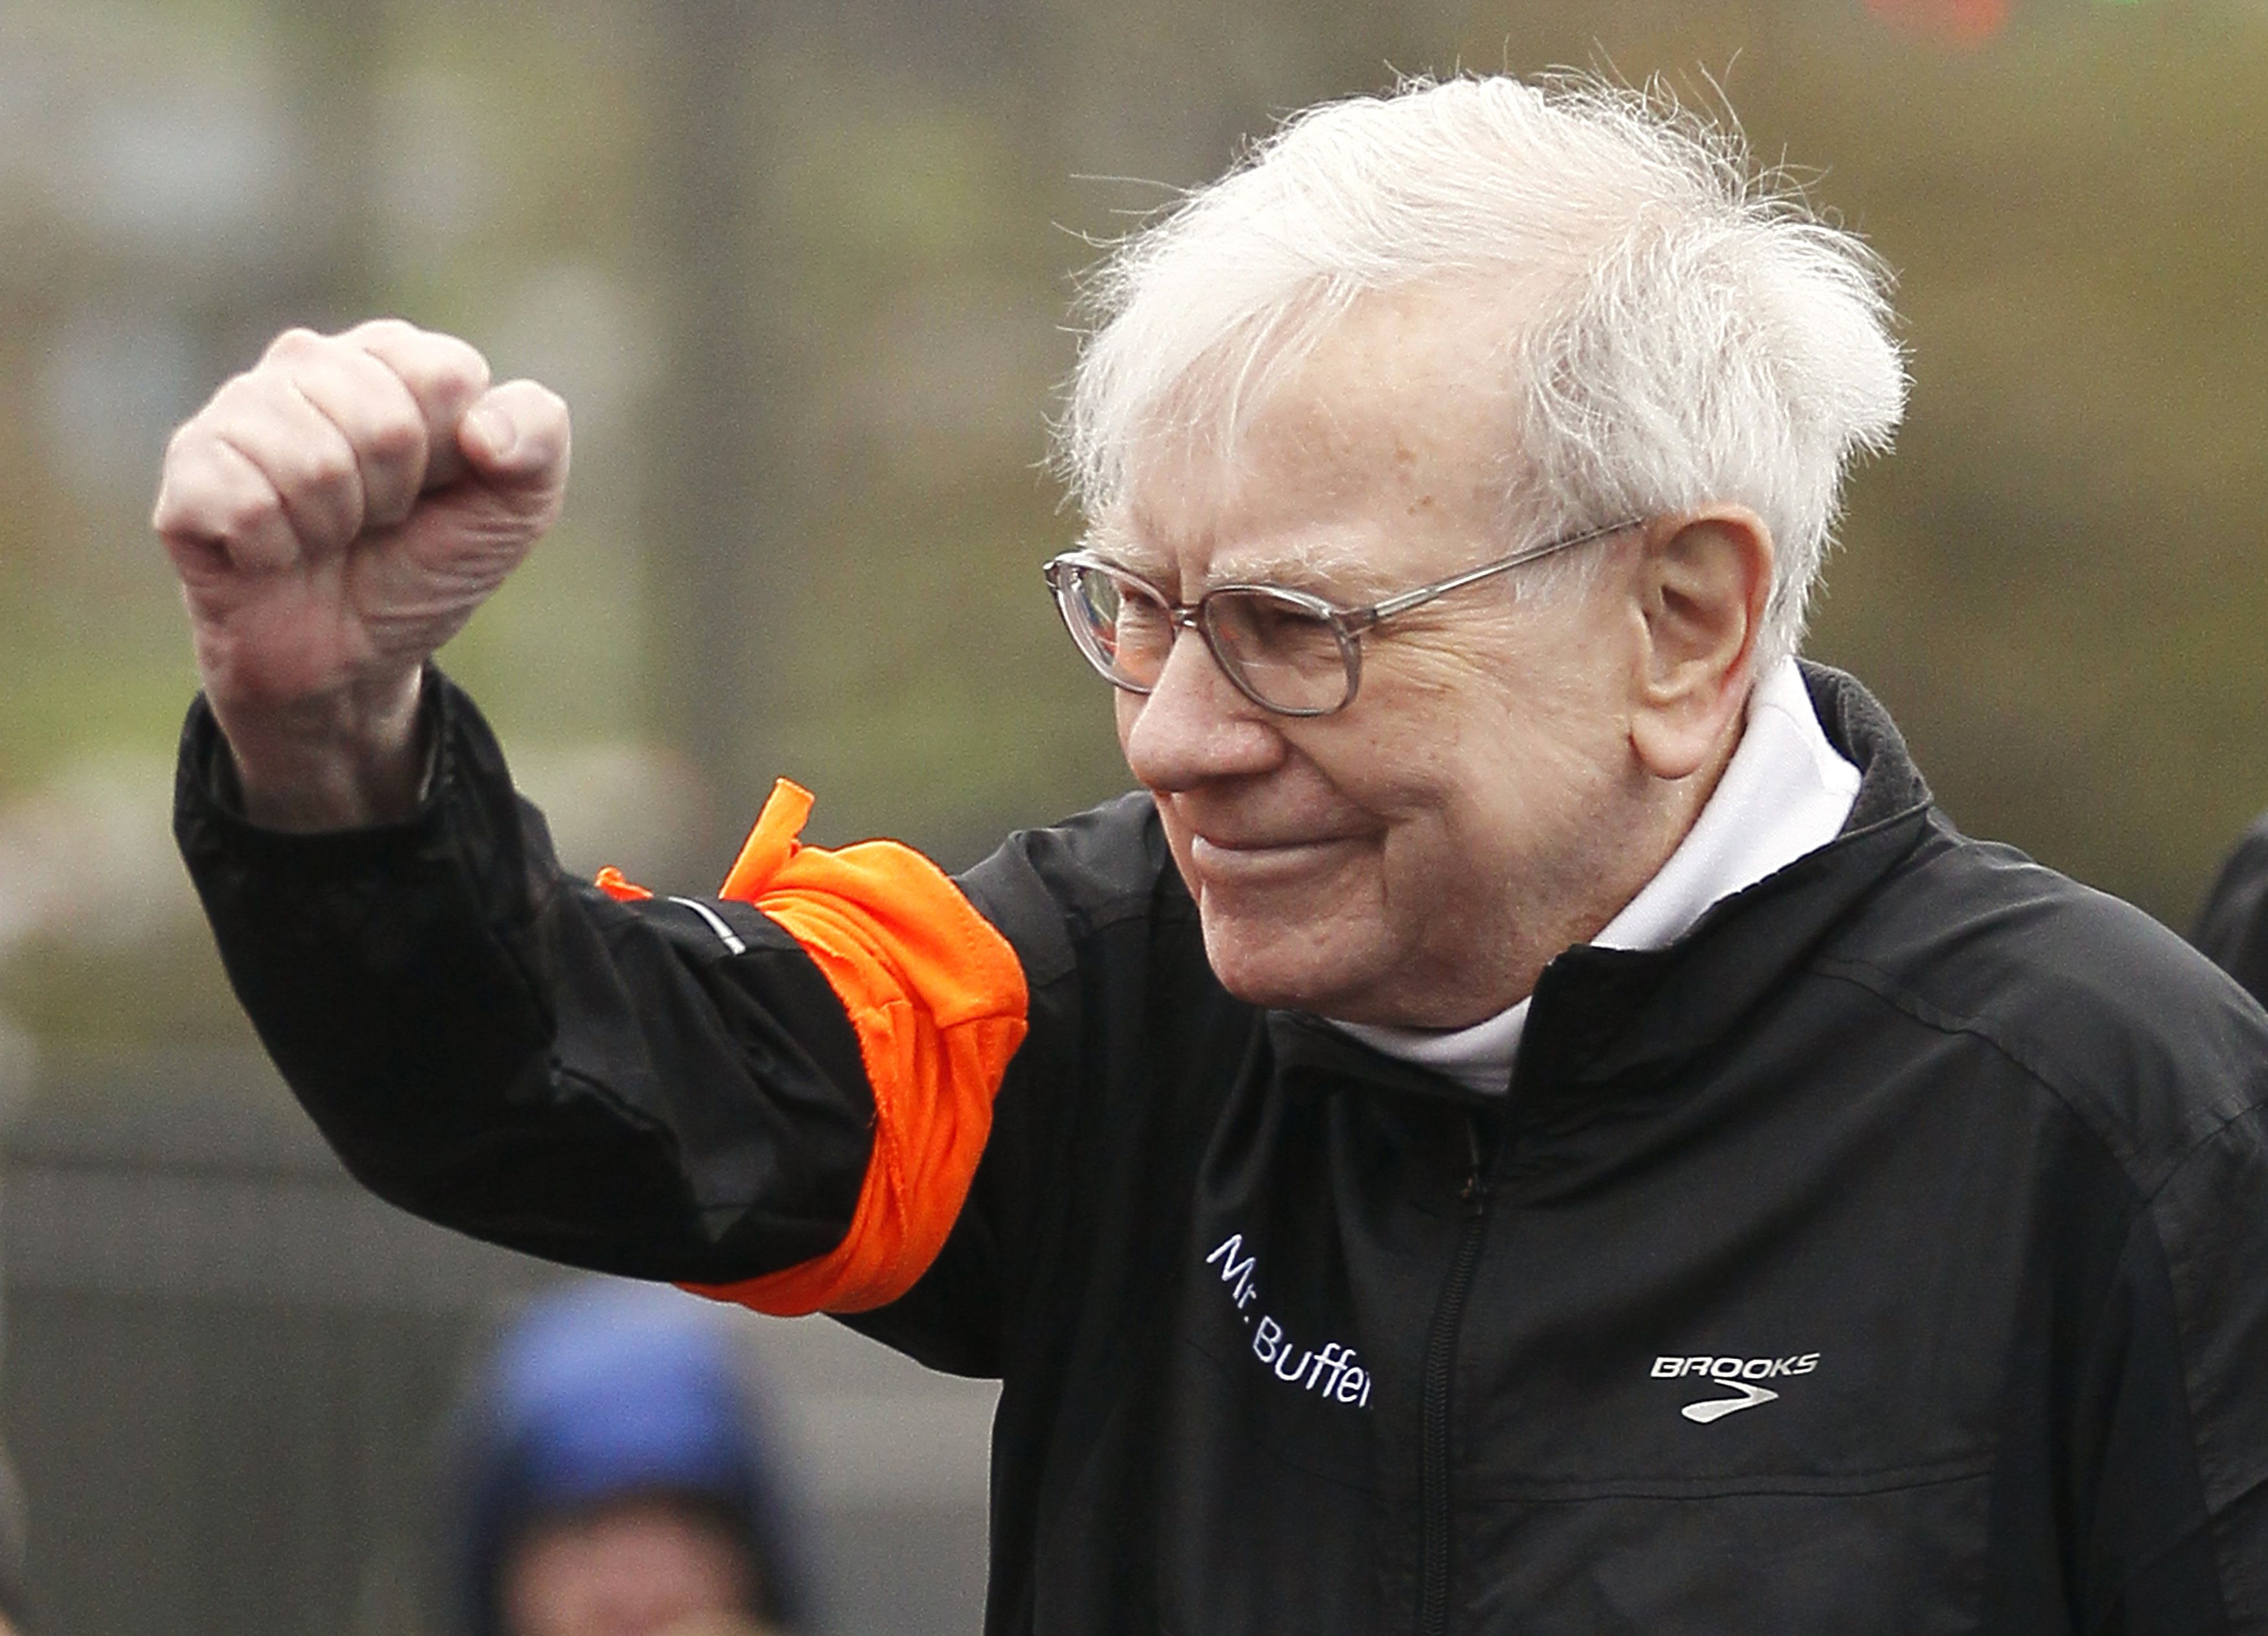 Warren Buffett's Berkshire Hathaway to buy $250 million worth of Snowflake's shares in private placement